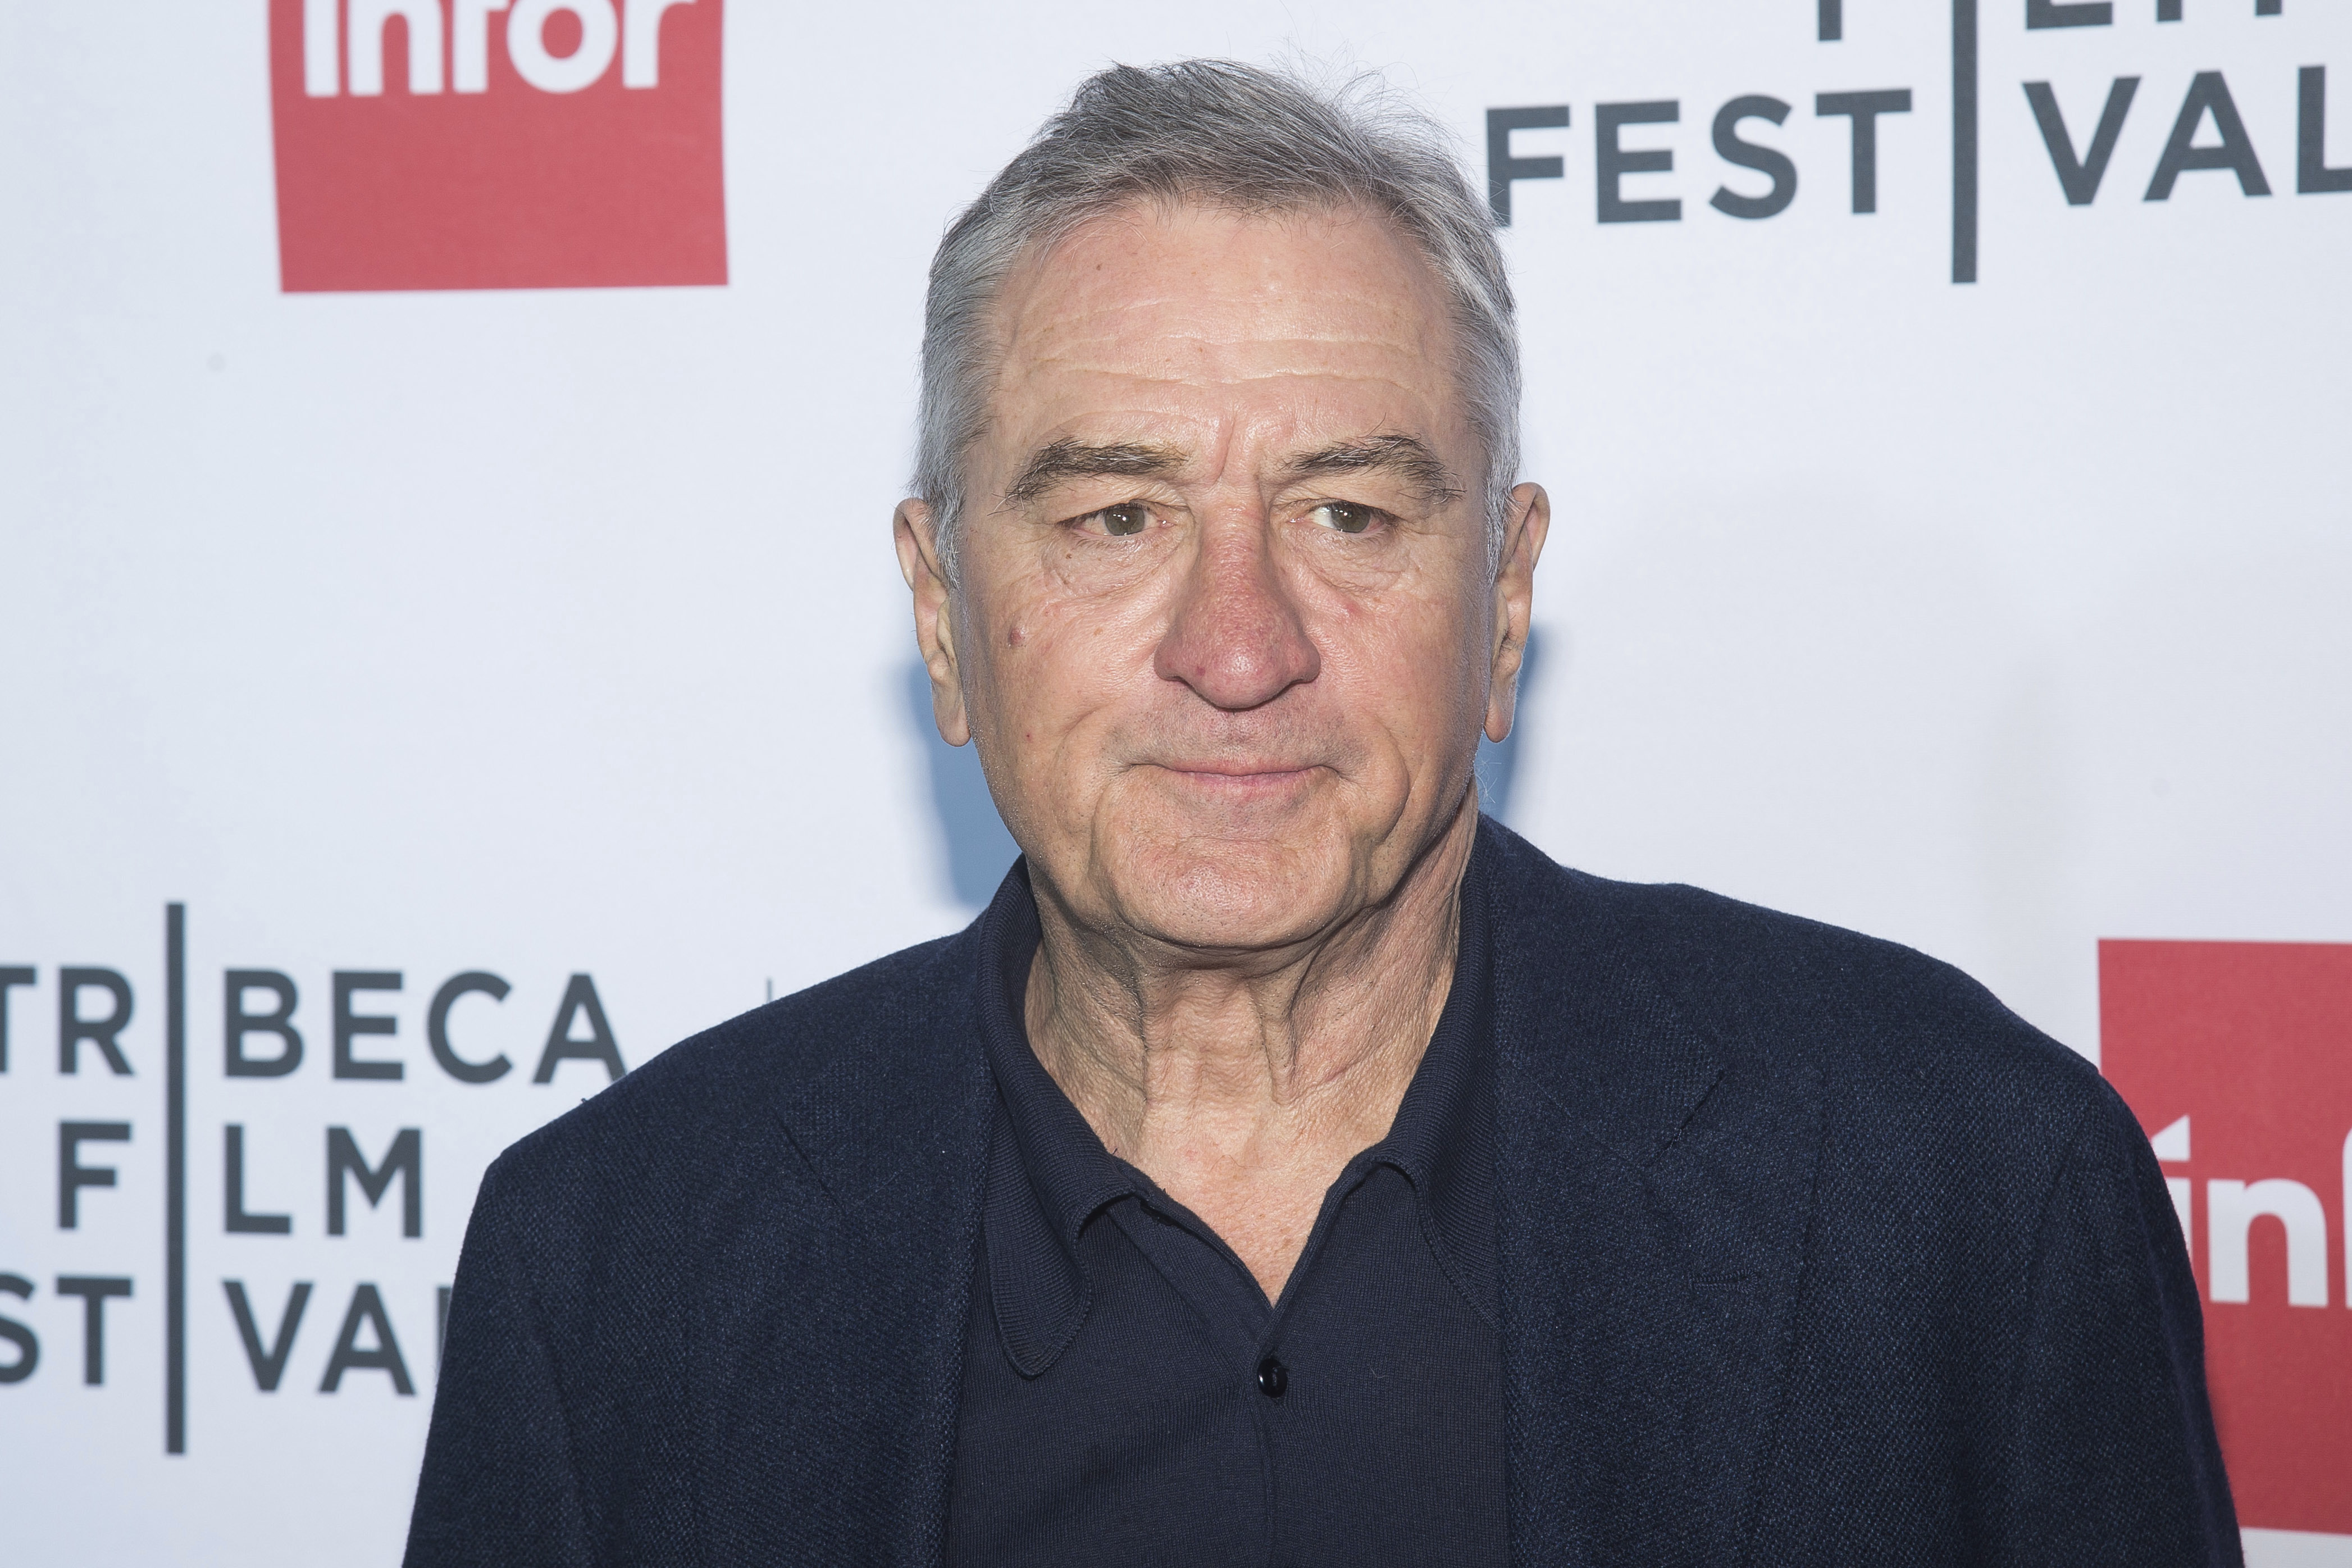 FILE - In this April 21, 2016 file photo, Robert De Niro attends a special 40th anniversary screening of "Taxi Driver" during the 2016 Tribeca Film Festival in New York. The 2016 election has provoked a visceral, intense response from many in the arts community, prompting songs, videos and uncommon ferocity against Trump, arguably once one of their own. De Niro called Trump “a dog,” “a pig,” “an idiot” and “a mutt, who doesn’t know what he’s talking about.” (Photo by Charles Sykes/Invision/AP, File)